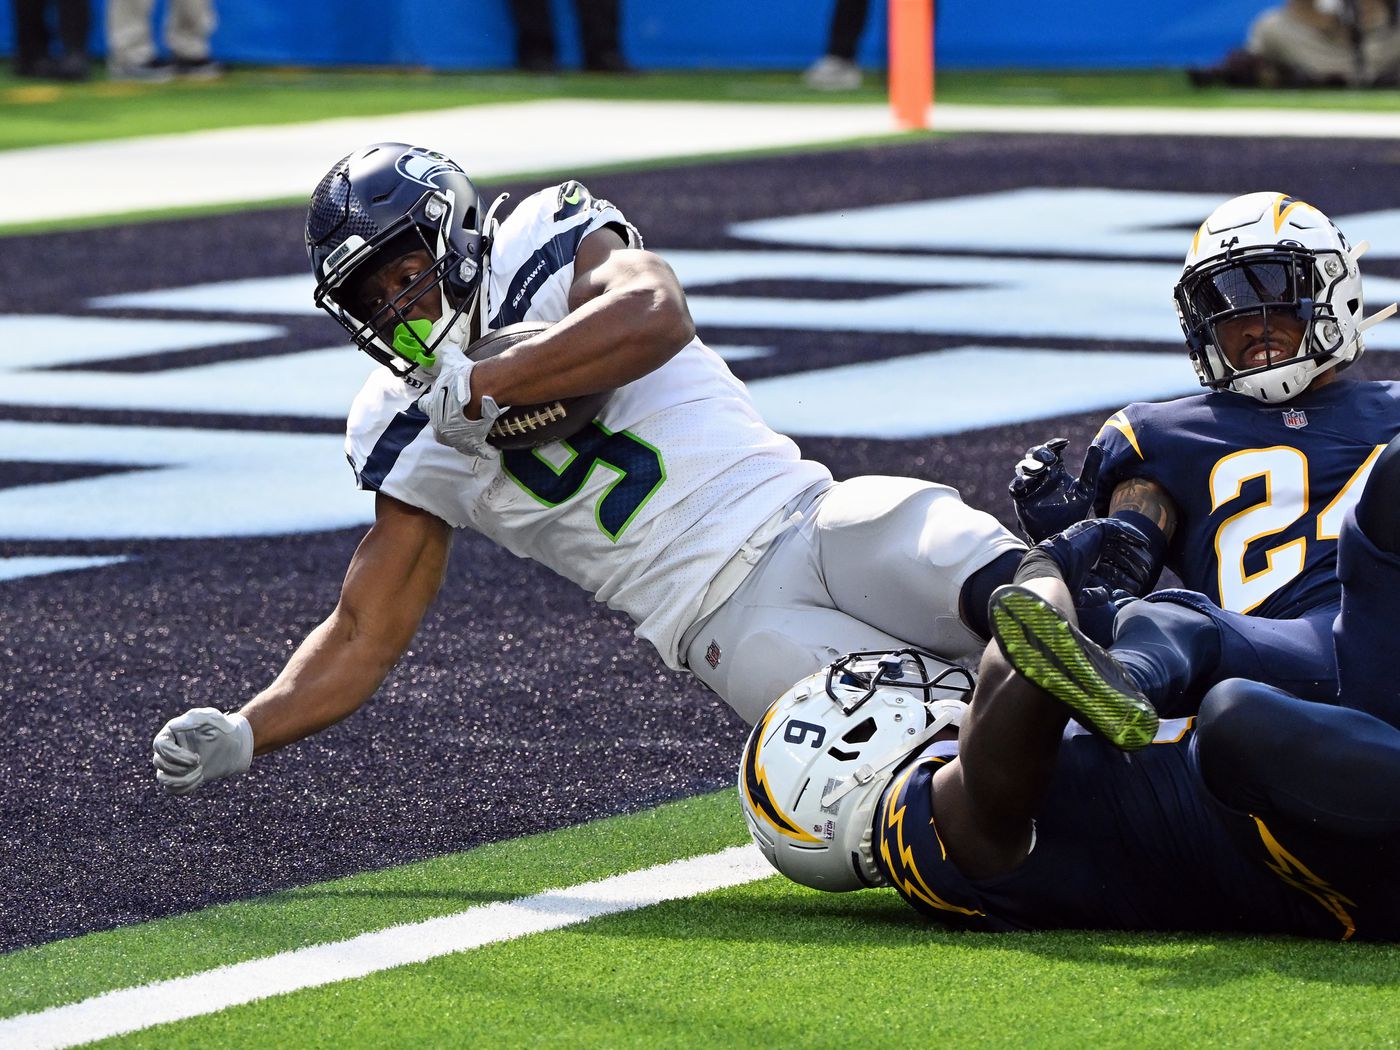 Run of Fame: Seahawks RB Kenneth Walker III Stars vs. Chargers